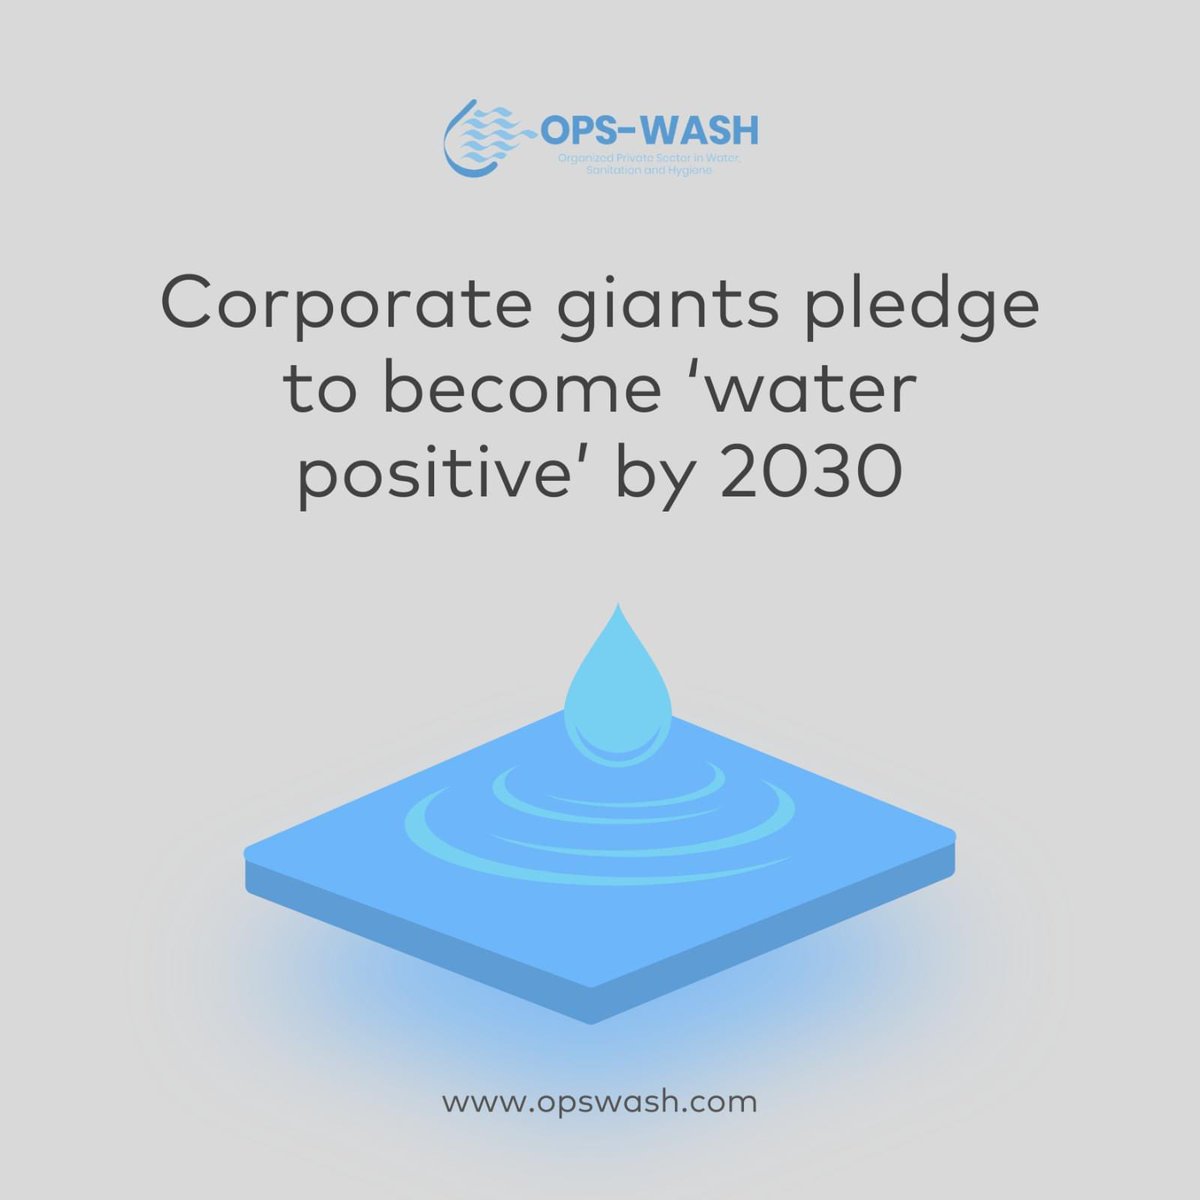 The concept of ‘Water Positive Companies’ is gaining significant traction. Water replenishment is a key indicator of their sustainability efforts. These businesses address their own water footprint & also contributing positively to the water balance in their operating regions.